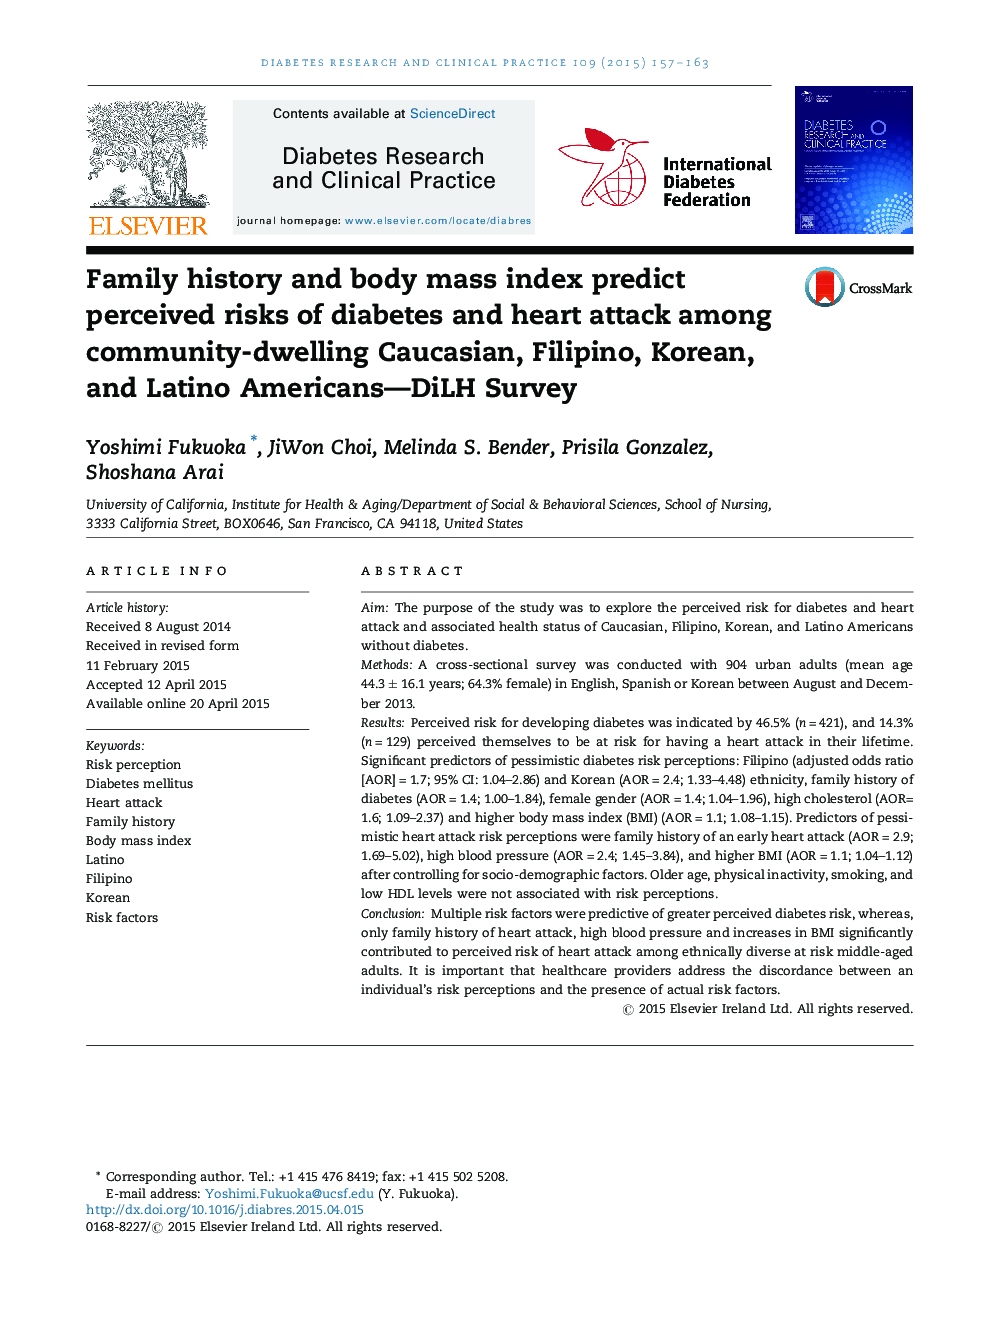 Family history and body mass index predict perceived risks of diabetes and heart attack among community-dwelling Caucasian, Filipino, Korean, and Latino Americans-DiLH Survey